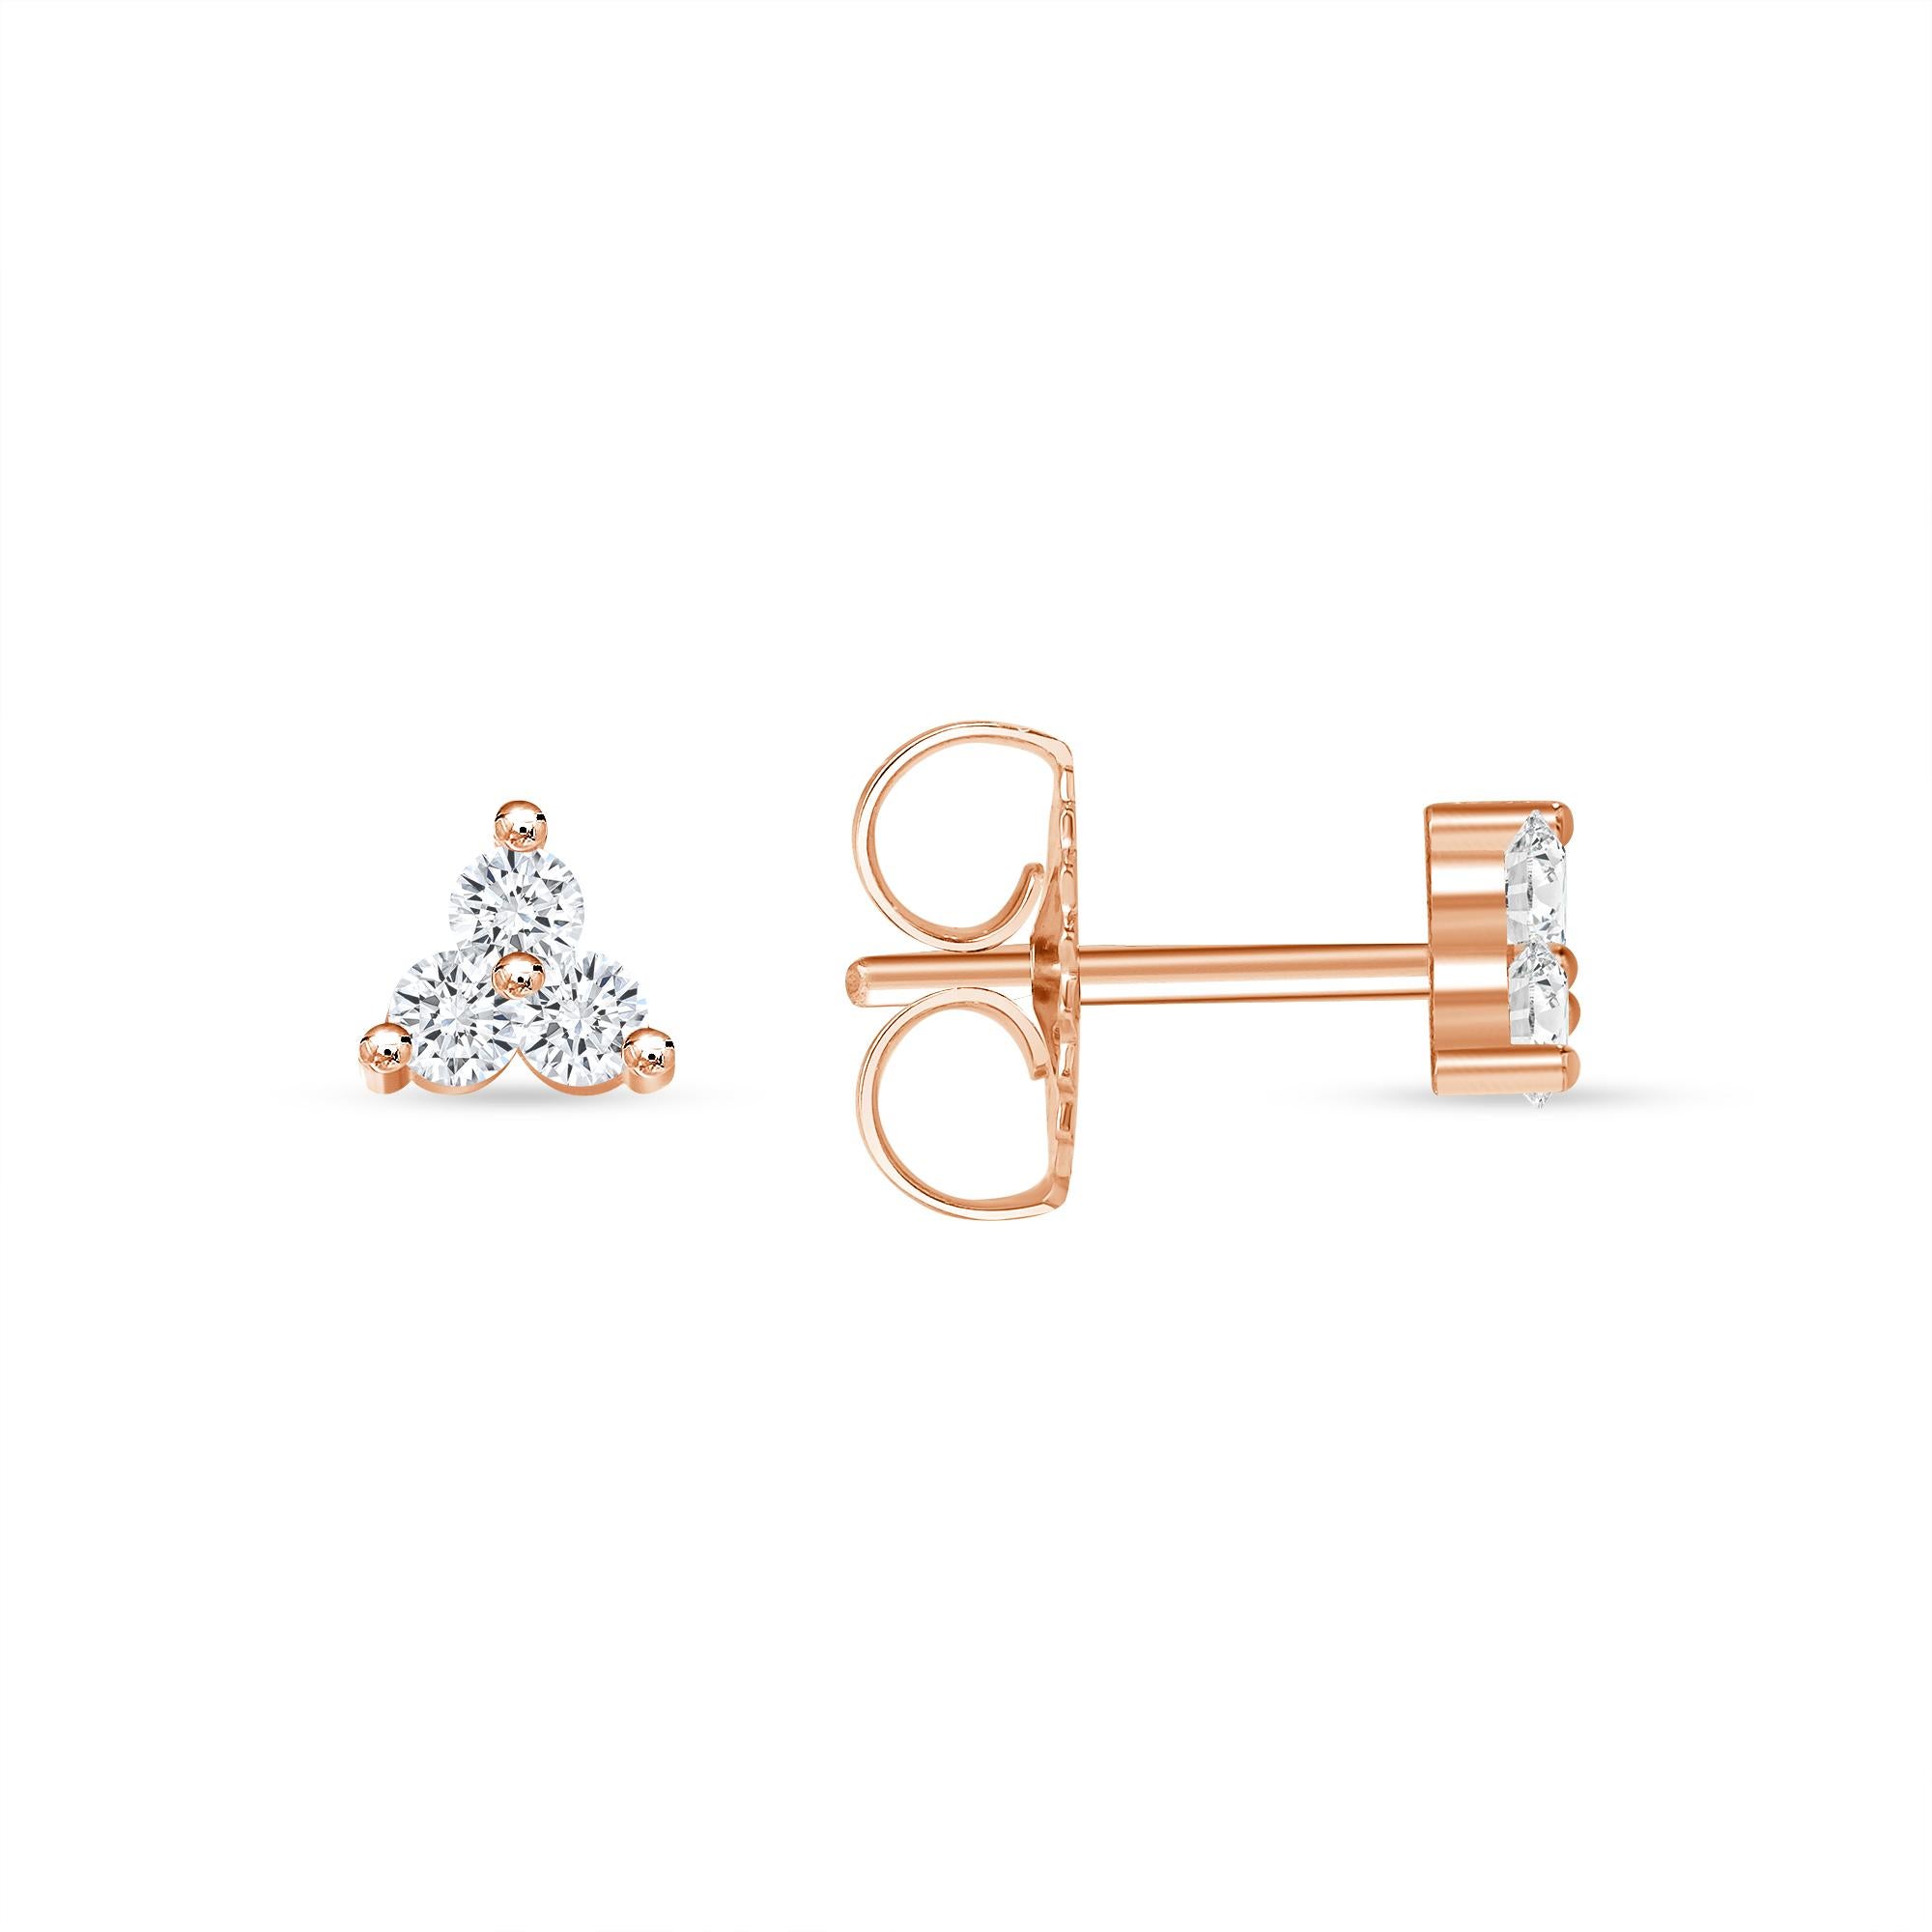 These 0.12 Carat Total Weight Three Stone Diamond Earrings are a beautiful way to add some sparkle to your look. Crafted with three brilliant round cut diamonds in a seamless setting, these earrings are set in your choice of yellow, white, rose 14K